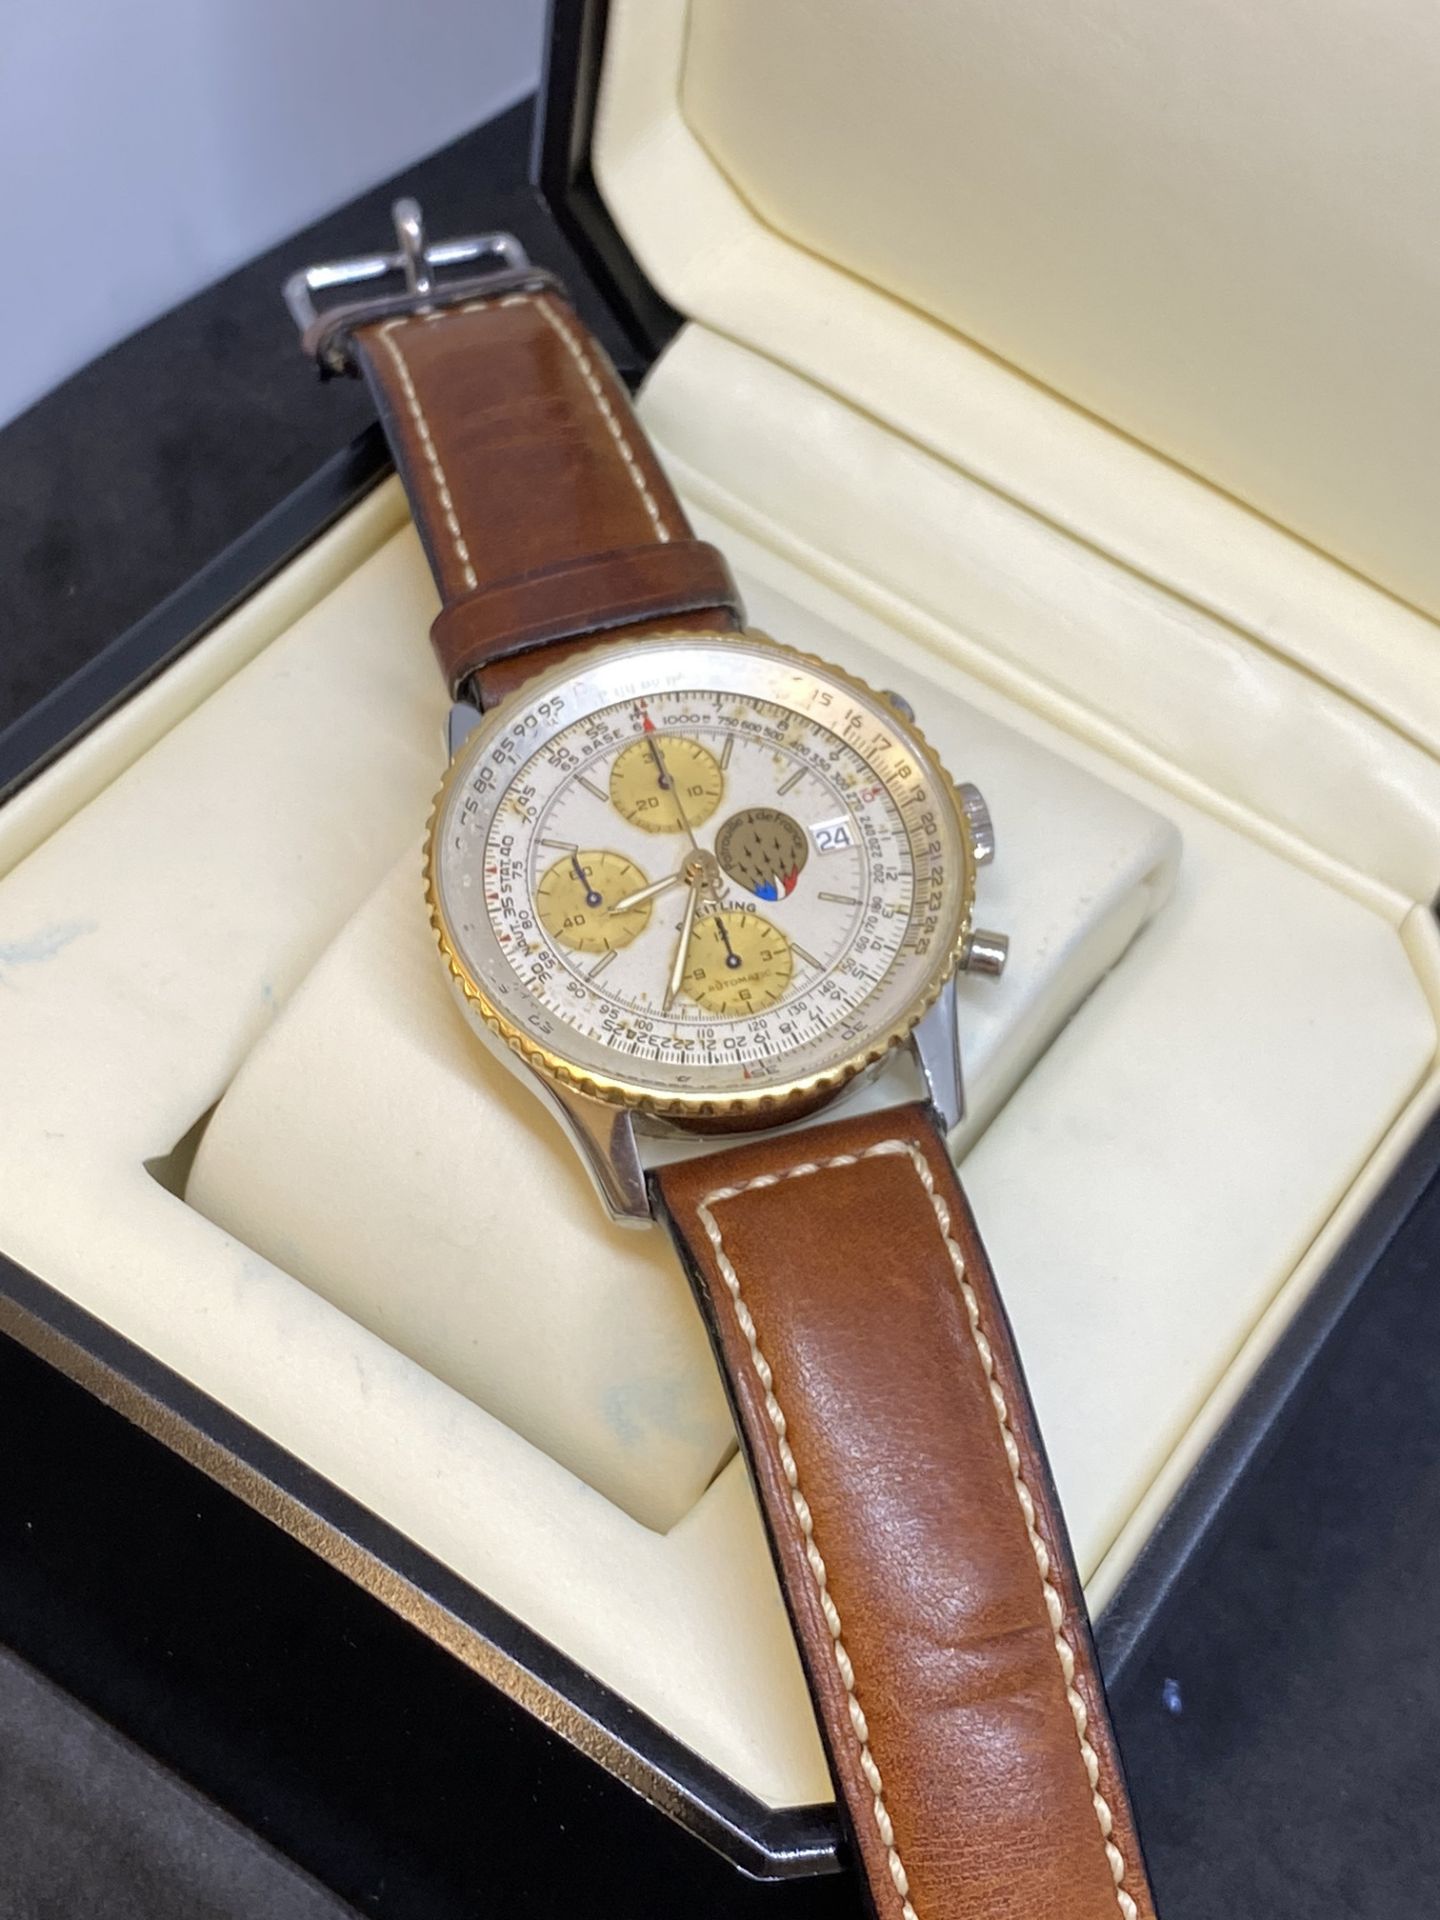 Breitling Navitimer Chronograph Watch with Box - Image 2 of 14